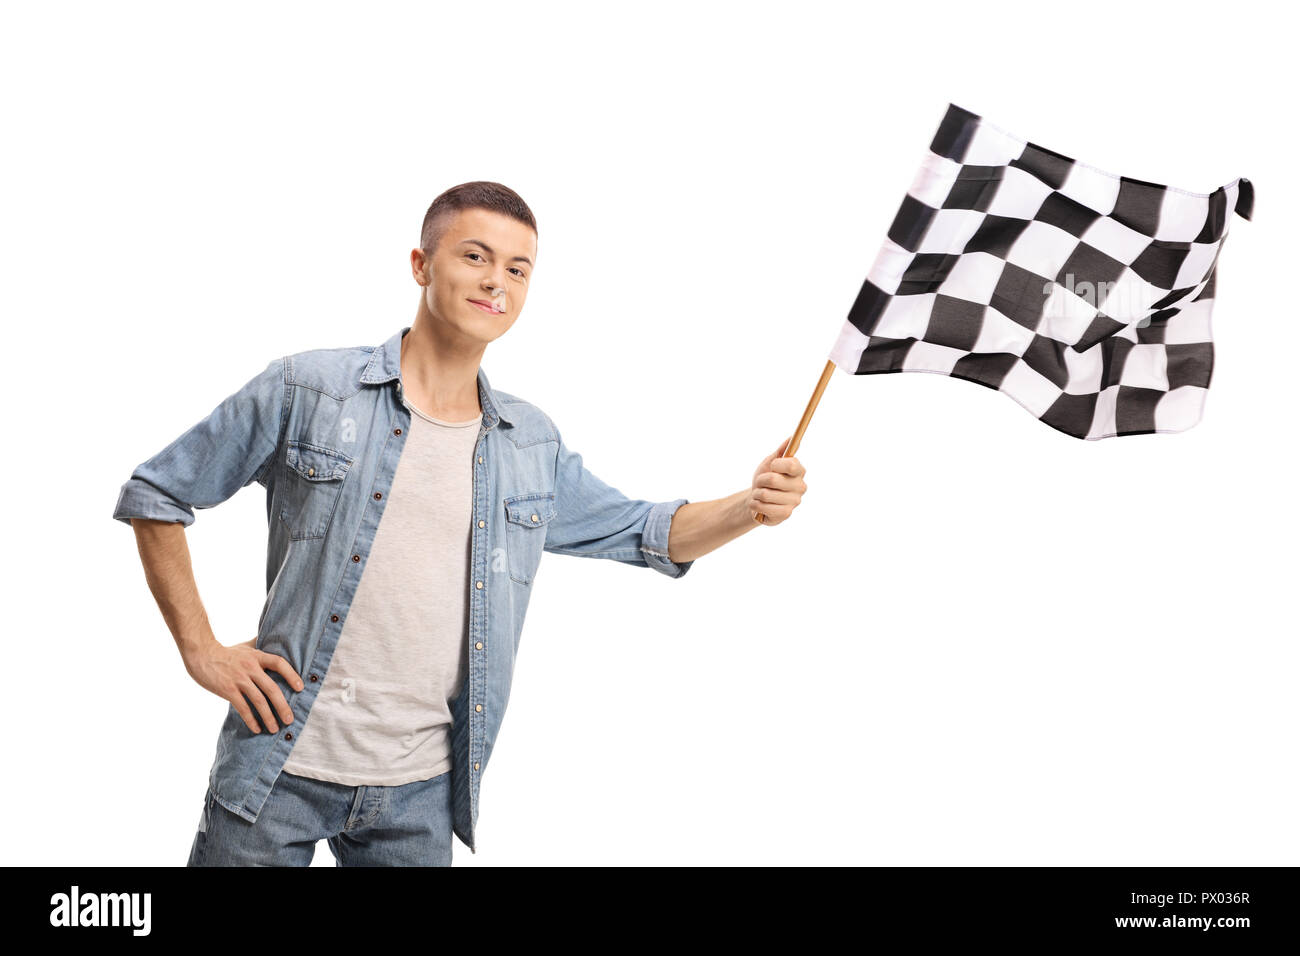 Teenager waving a checkered race flag isolated on white background Stock Photo